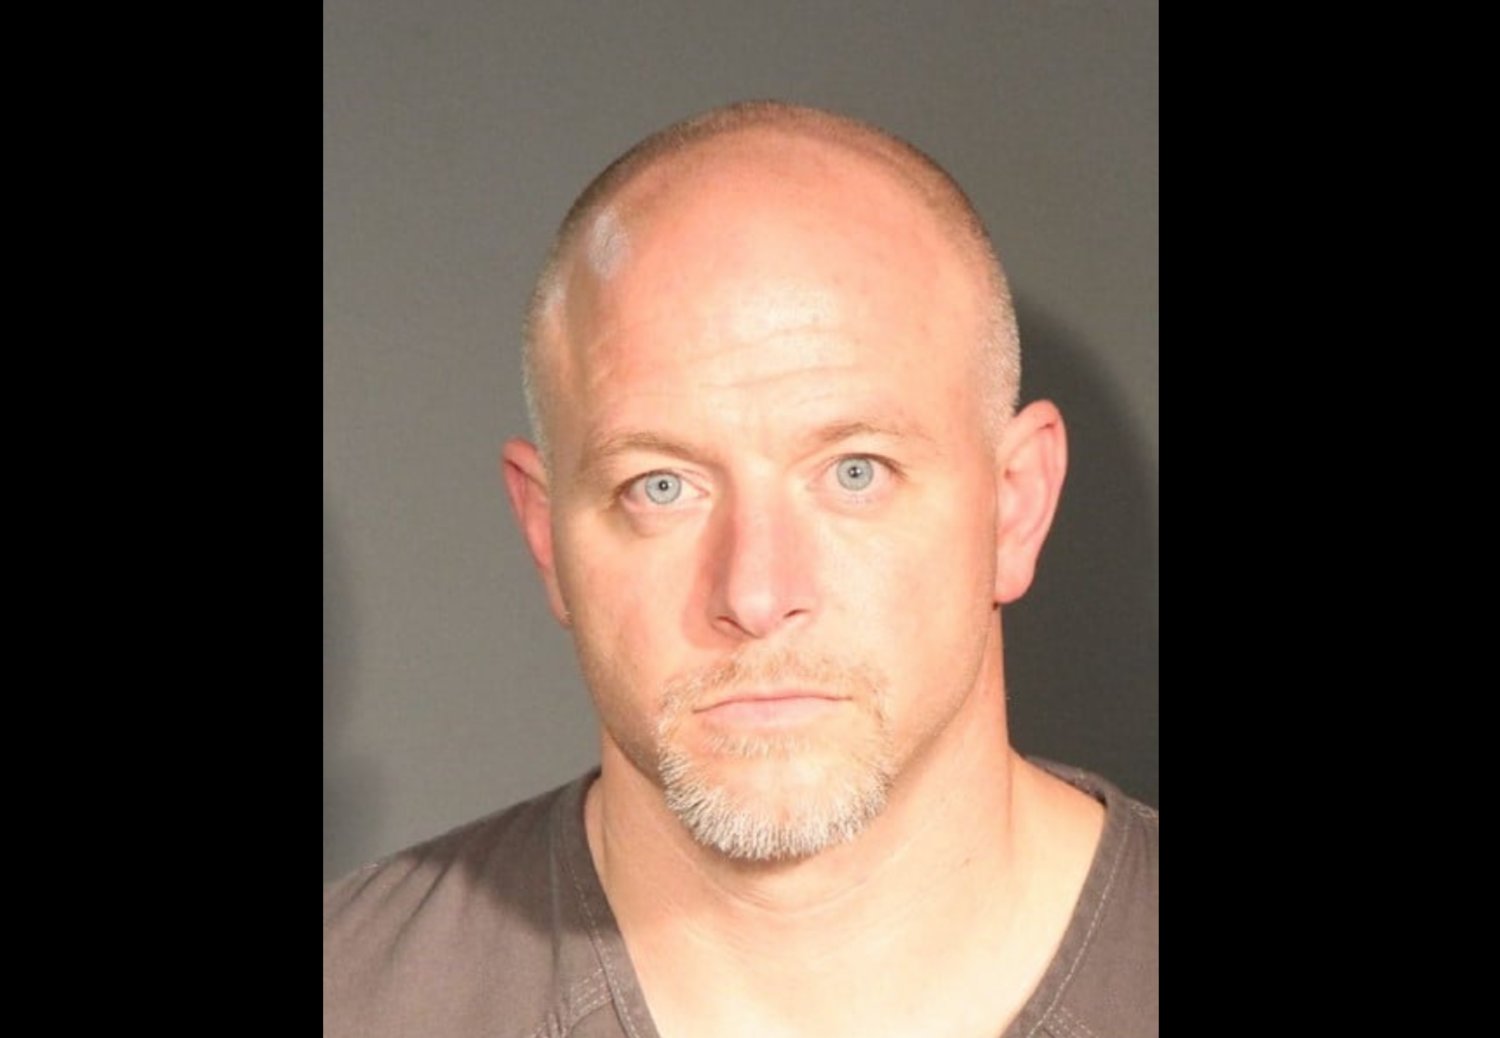 Skaggs is described as a white male, 45 years old, 5-feet 11-inches tall and 195 pounds. He is known to frequent areas near Eatonville, Ashford and Mineral. 